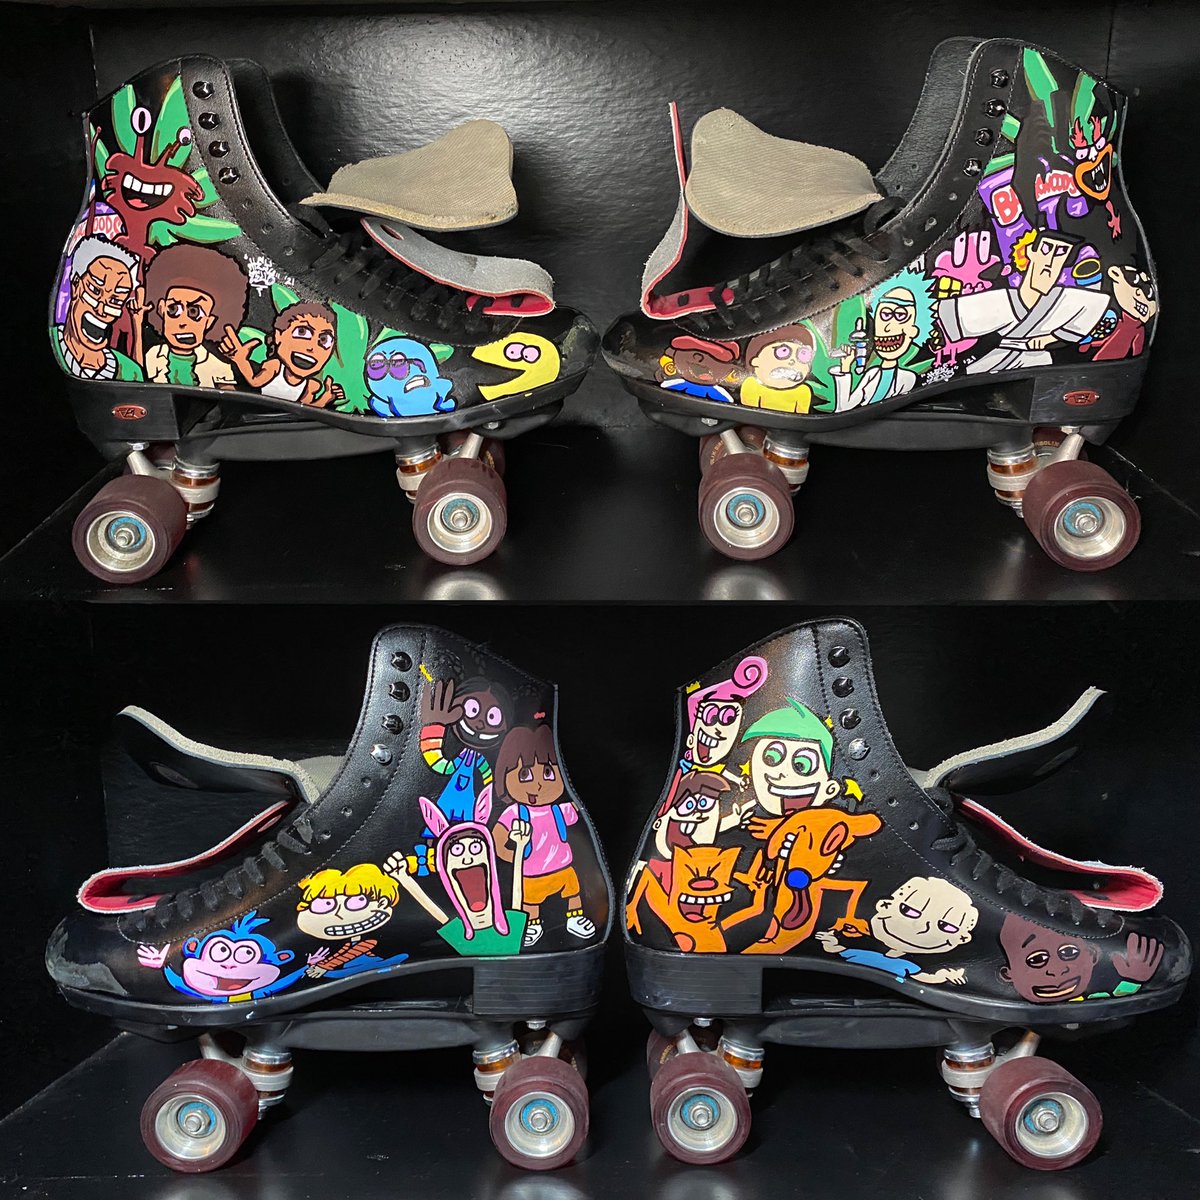  FINALLY DONE! Thank you so much  @okaymaal for trusting me to bring your vision to life! I had so much fun painting these nostalgic skates! Process photos will be in the thread below 